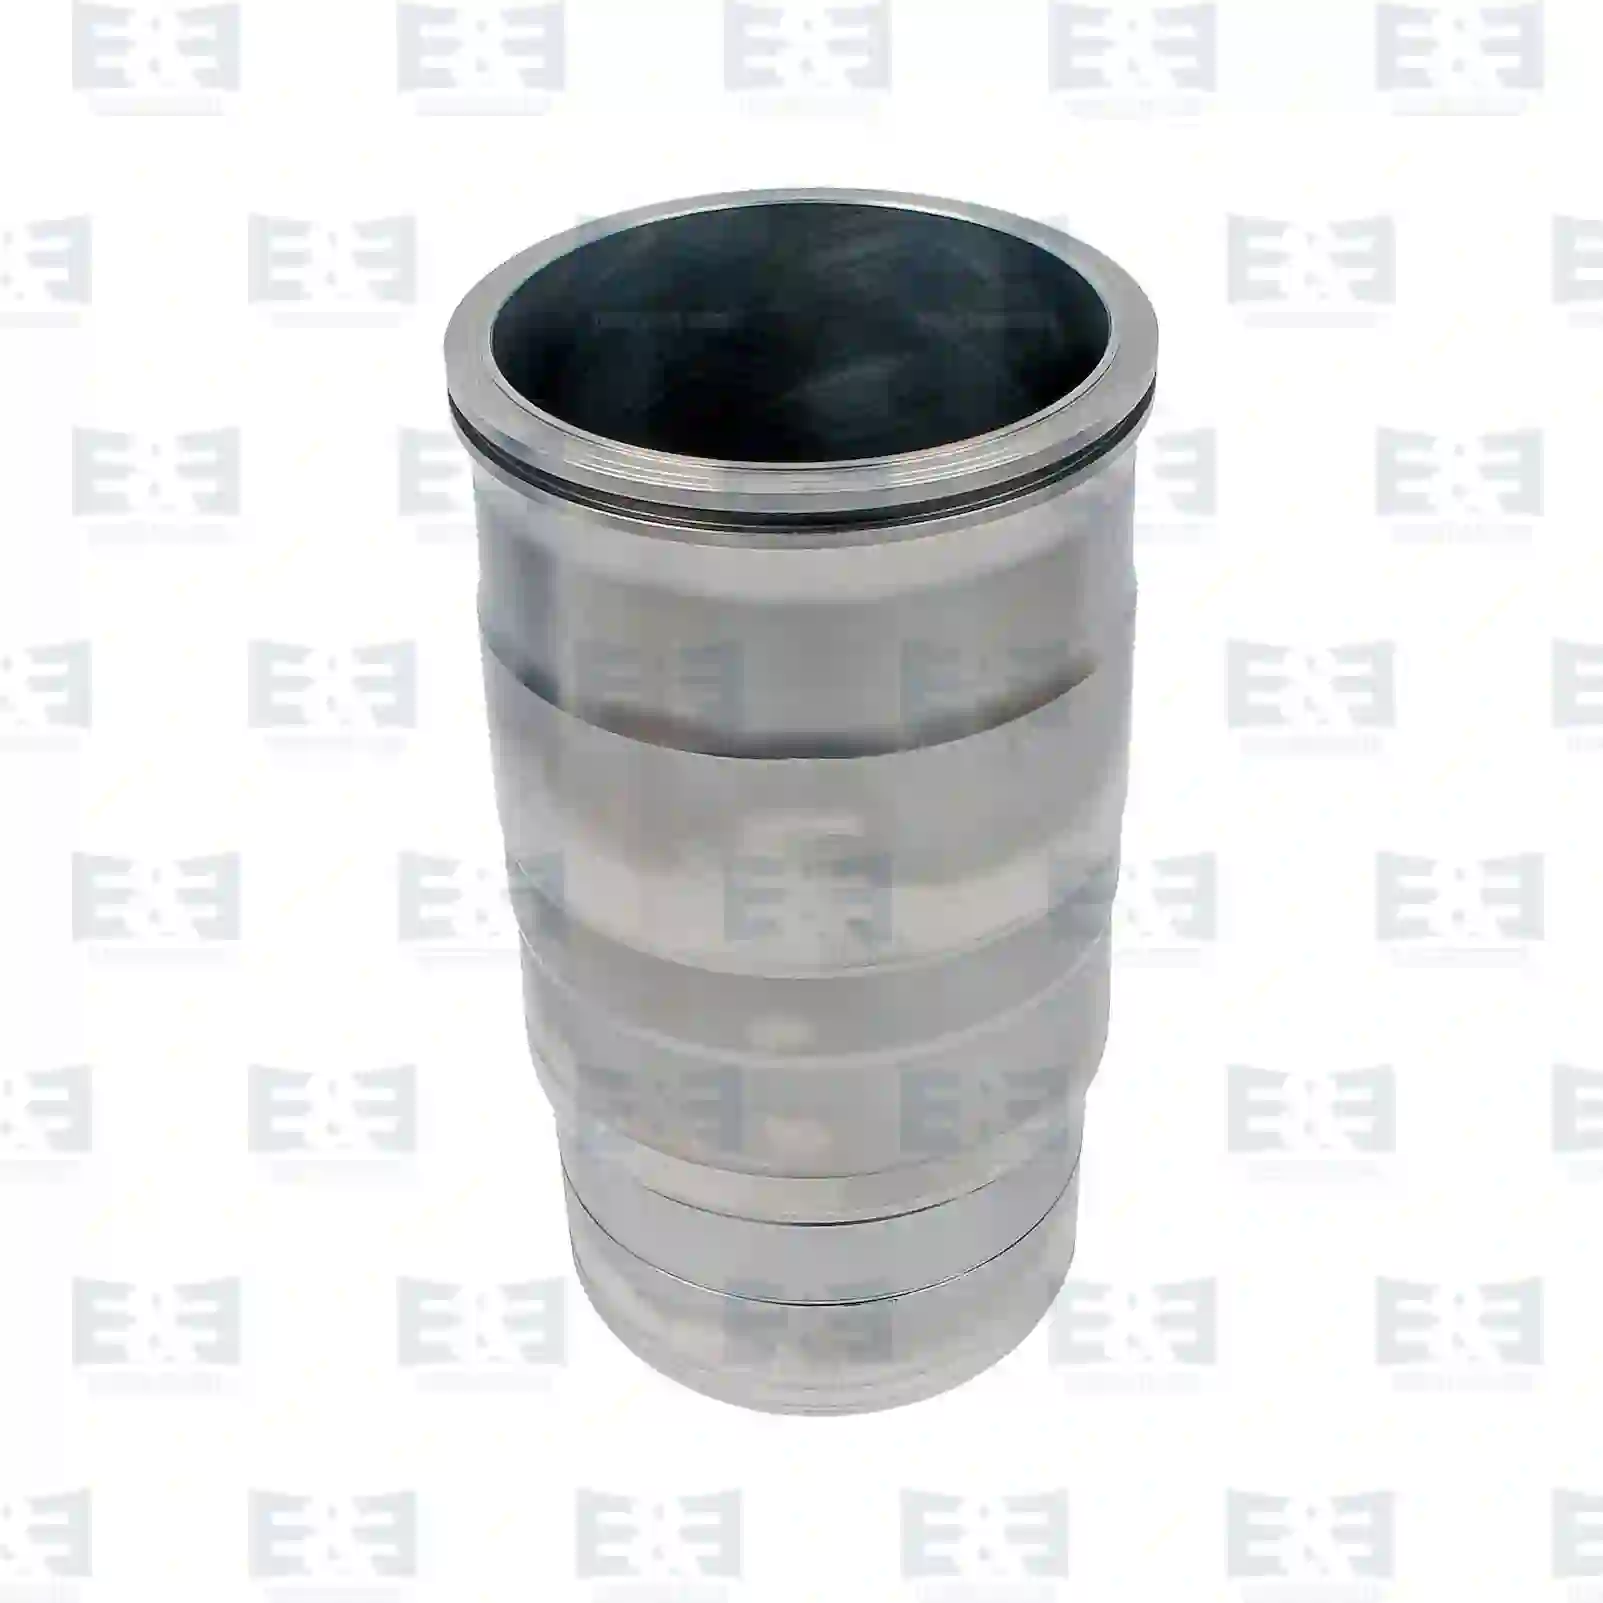 Cylinder liner, without seal rings, 2E2209940, 1850688, 1891882, 1893538, 1917105, 1917106, 2076168, 2183352, 2359445, ZG01078-0008 ||  2E2209940 E&E Truck Spare Parts | Truck Spare Parts, Auotomotive Spare Parts Cylinder liner, without seal rings, 2E2209940, 1850688, 1891882, 1893538, 1917105, 1917106, 2076168, 2183352, 2359445, ZG01078-0008 ||  2E2209940 E&E Truck Spare Parts | Truck Spare Parts, Auotomotive Spare Parts